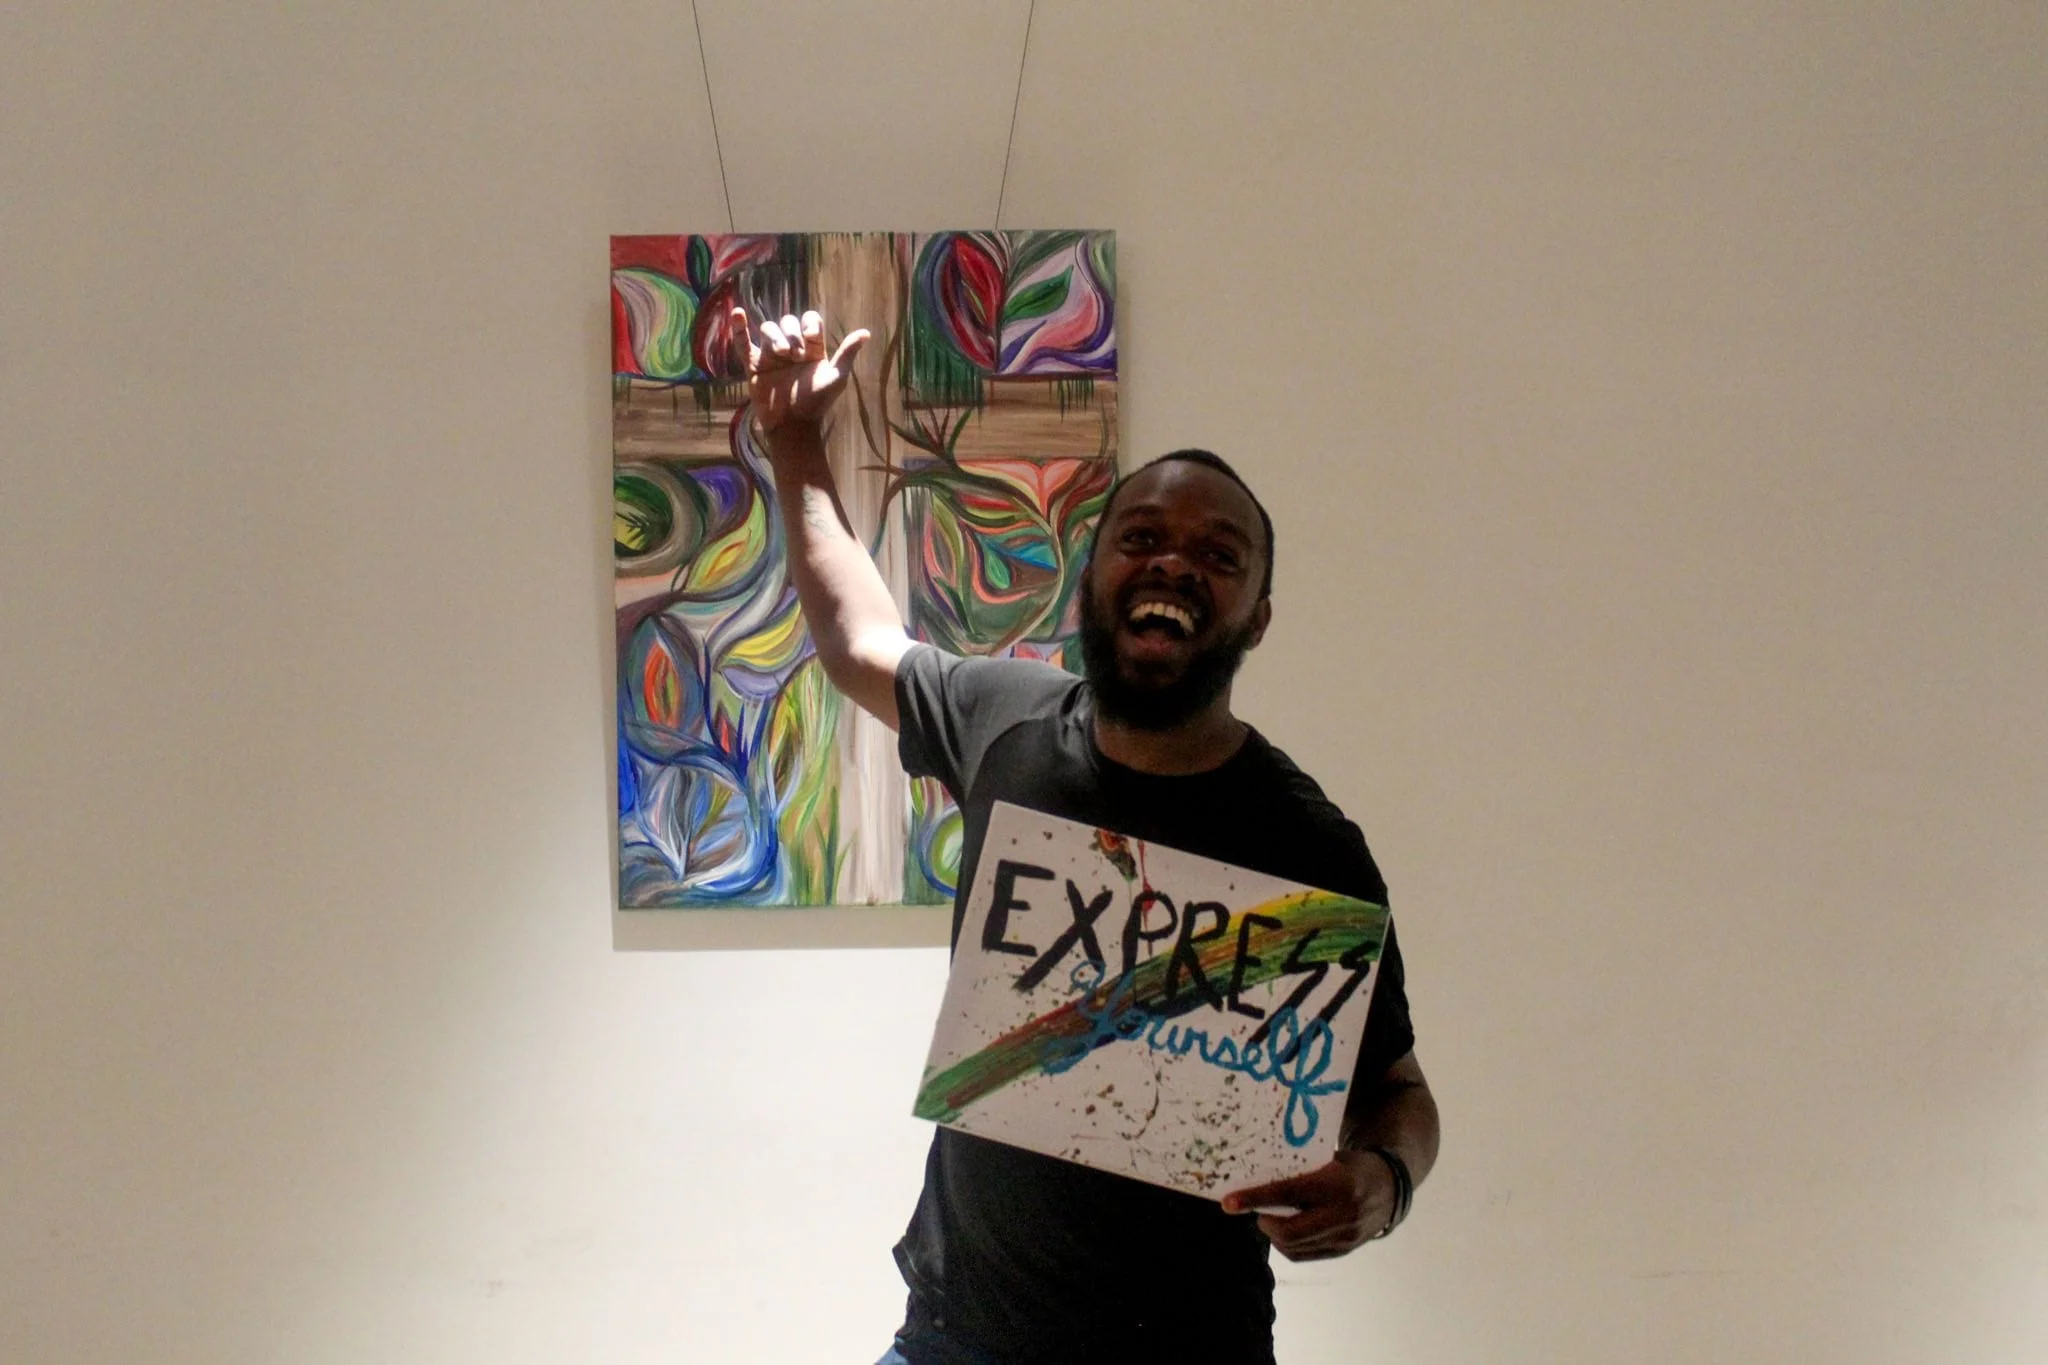 a man smiling in front of a painting, holding his own painting that reads "Express yourself"